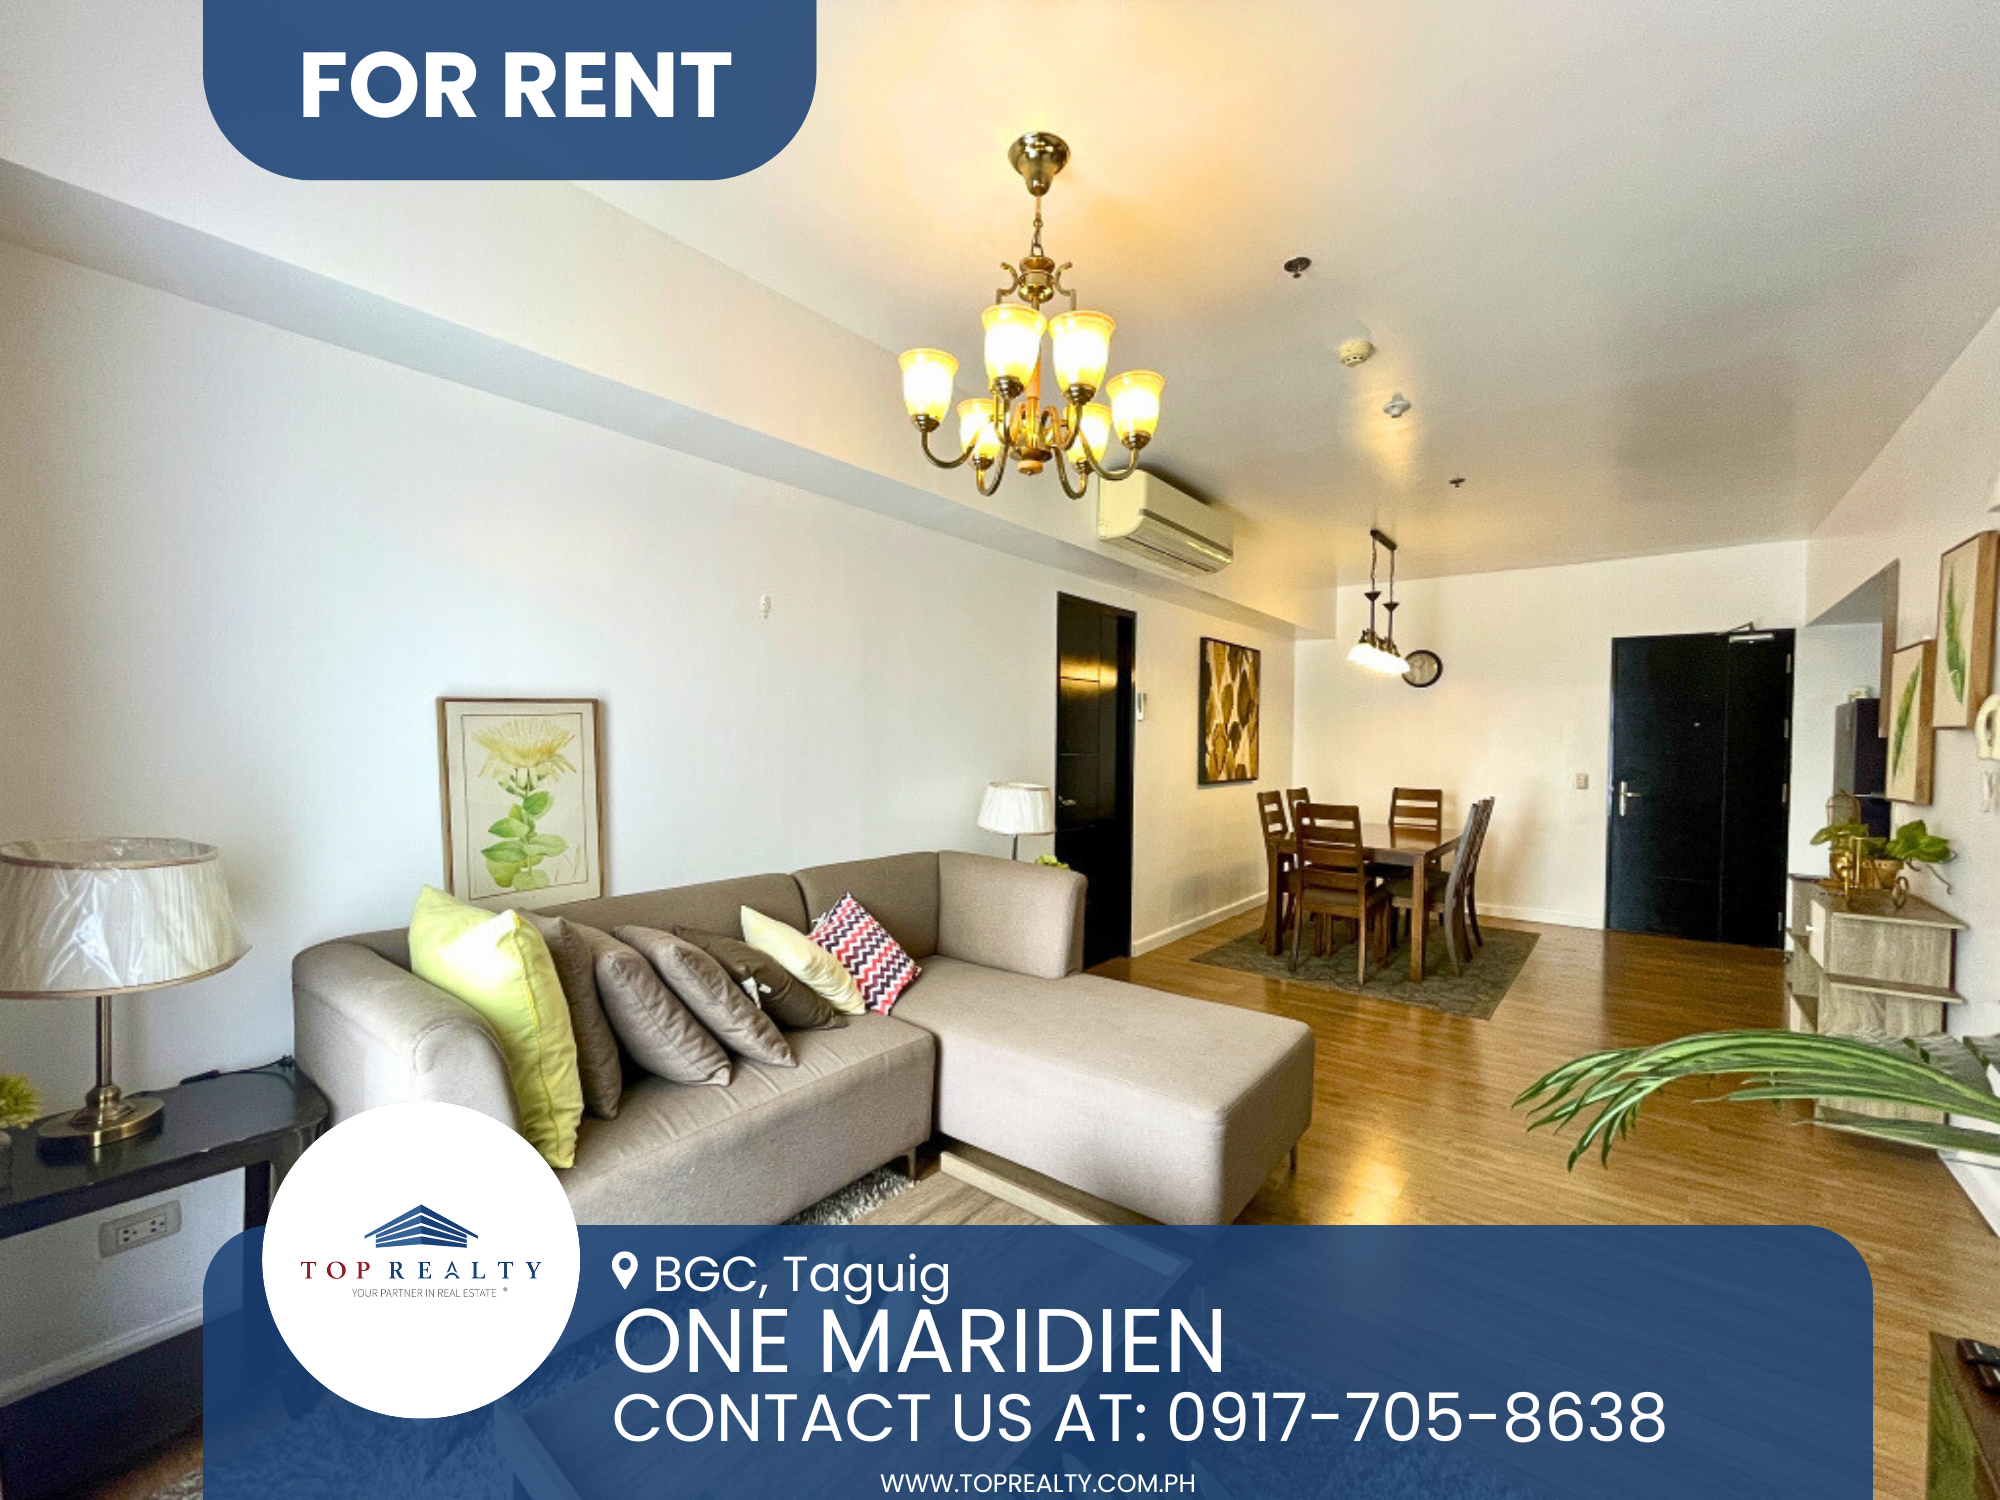 3BR Condo for Rent in One Maridien, BGC, Taguig City